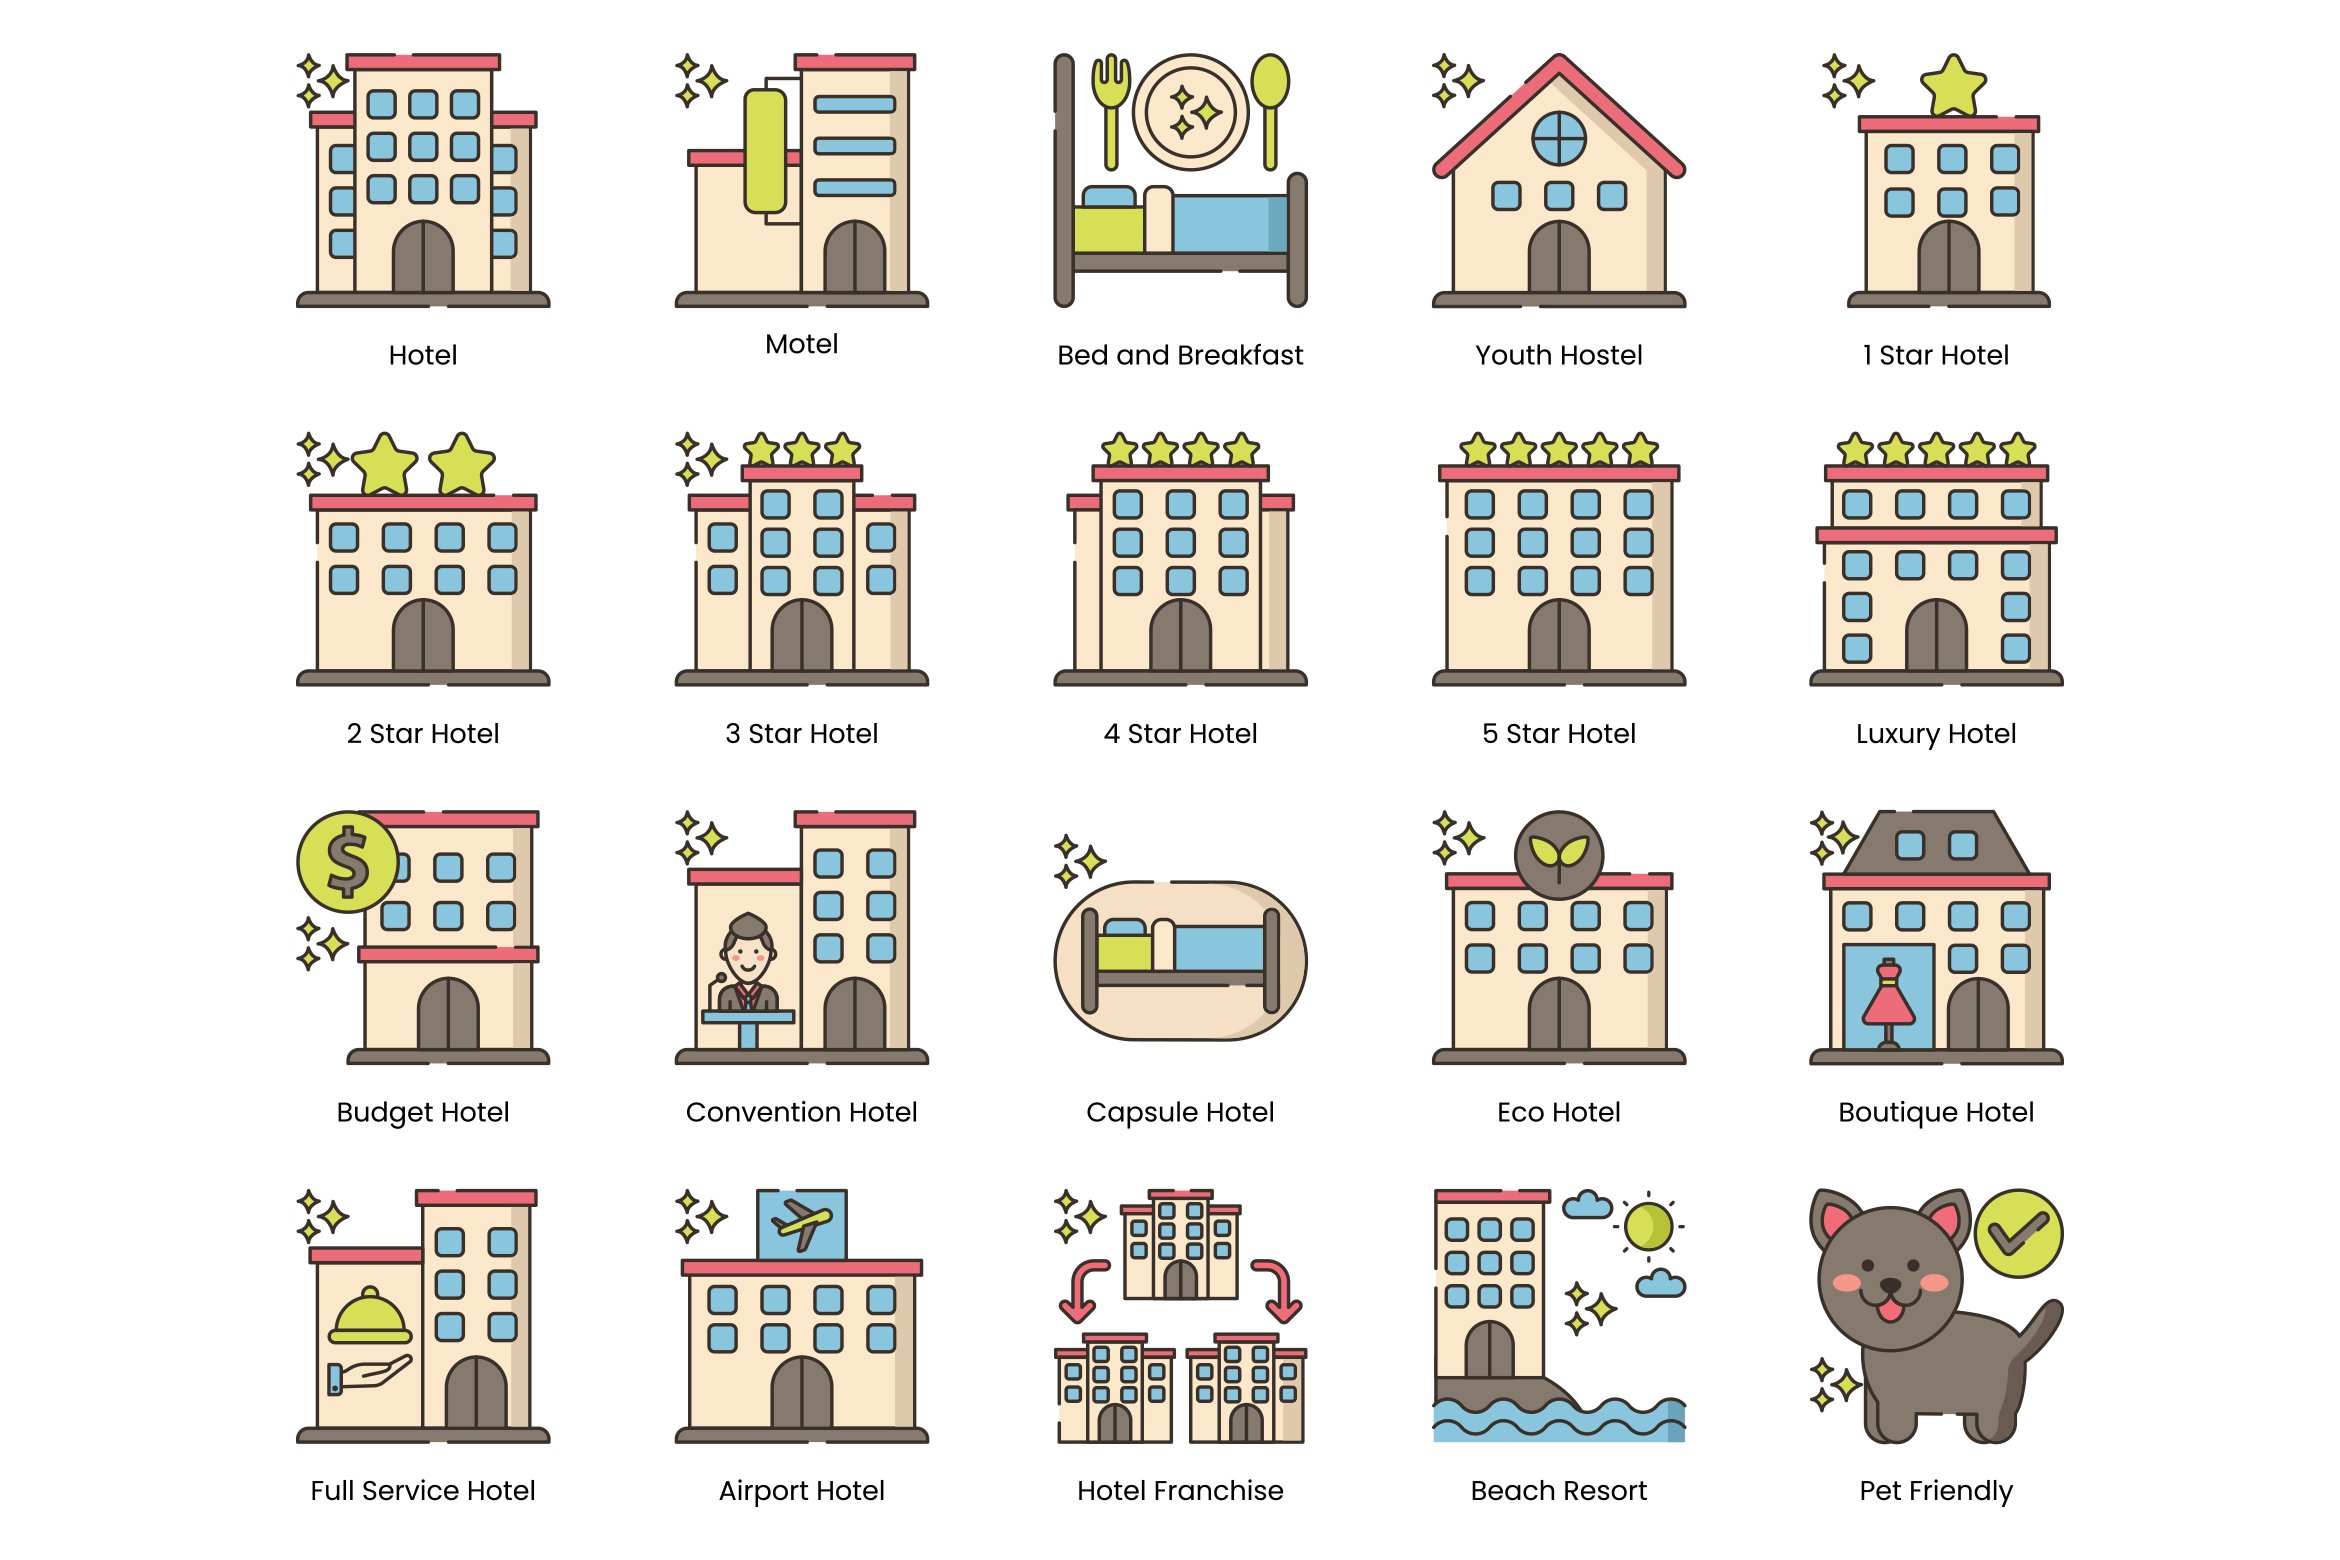 80 Hotel Management Icons | Hazel preview image.